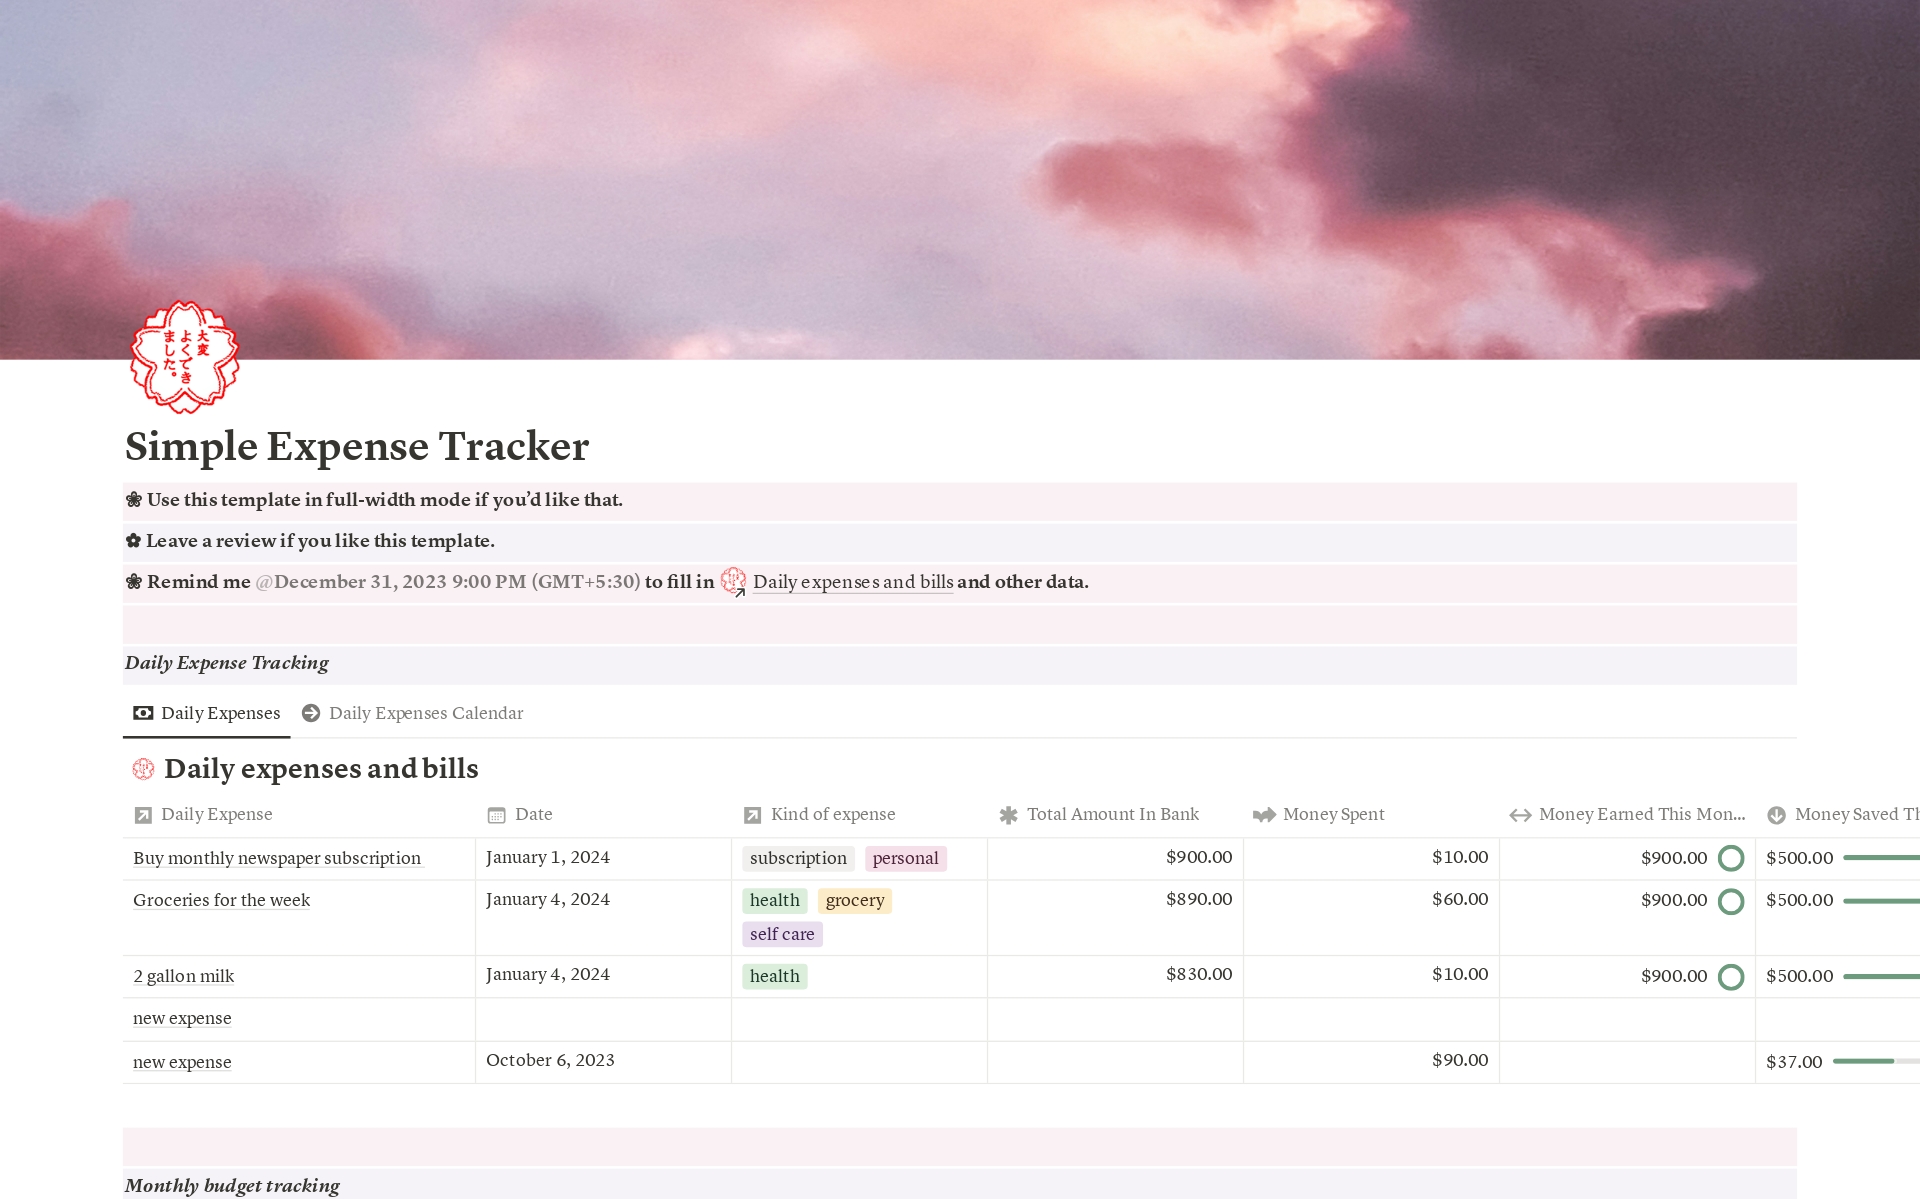 Introducing the "Simple Expense Tracker" Notion Planning Template – your ultimate solution to effortless financial management! 

